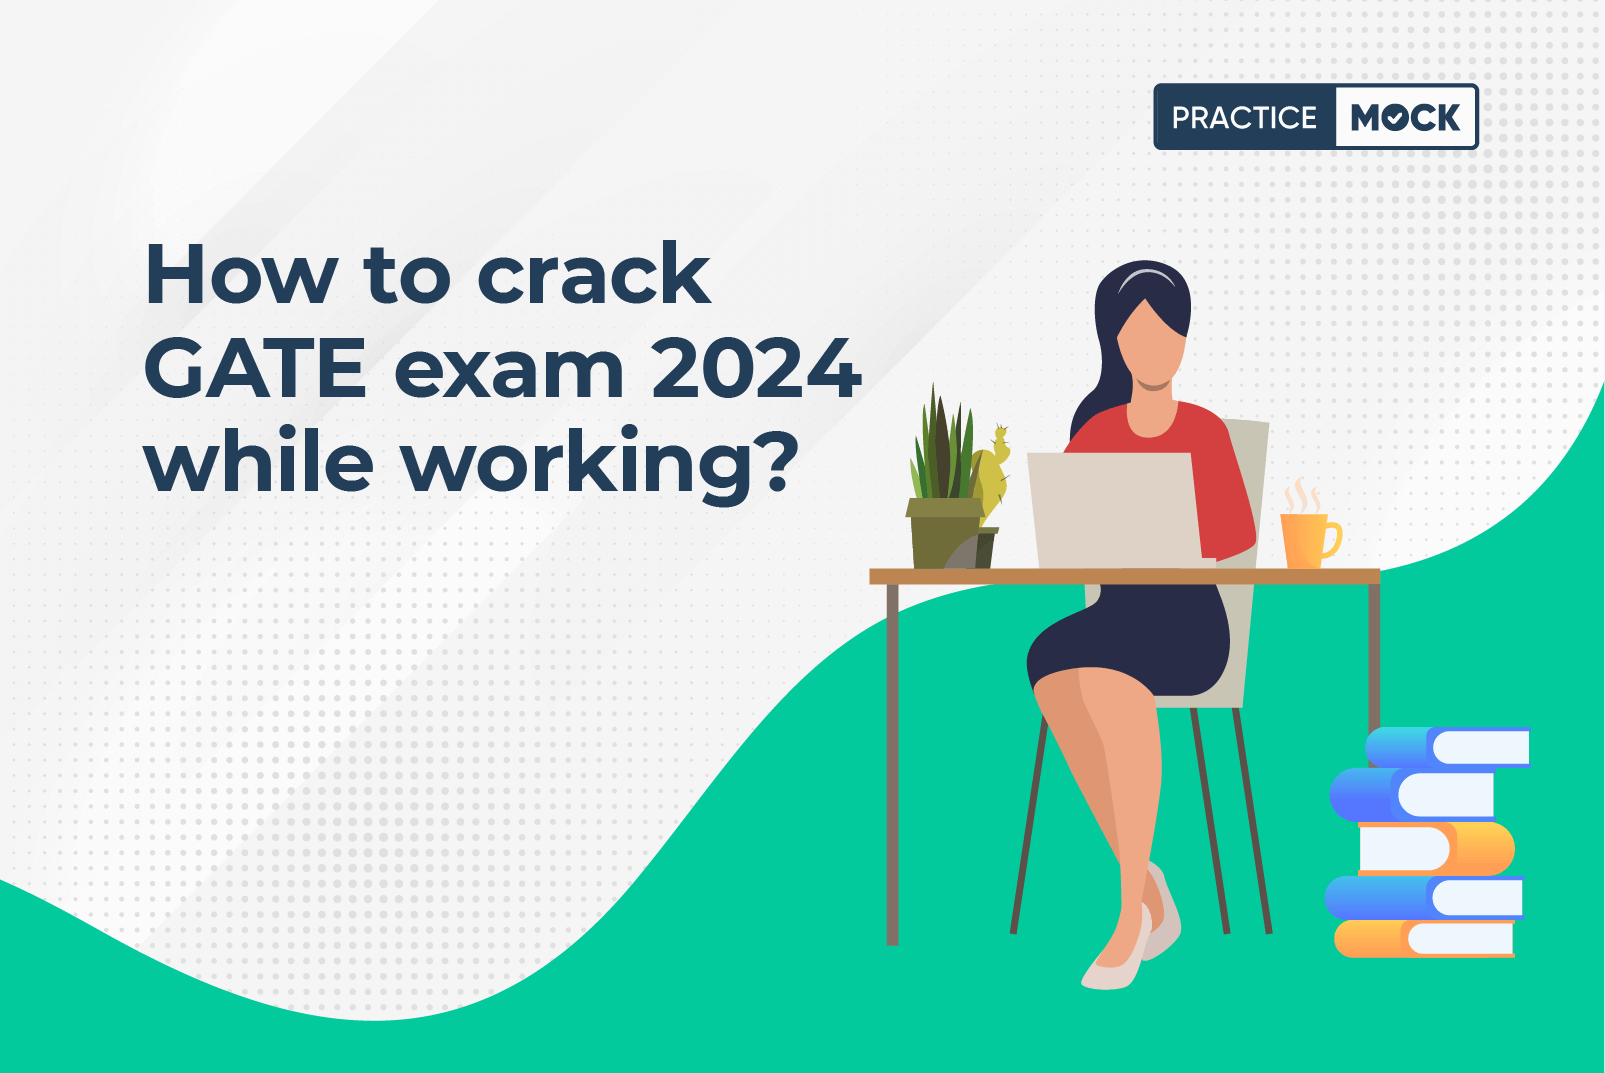 How to crack GATE exam 2024 while working? PracticeMock